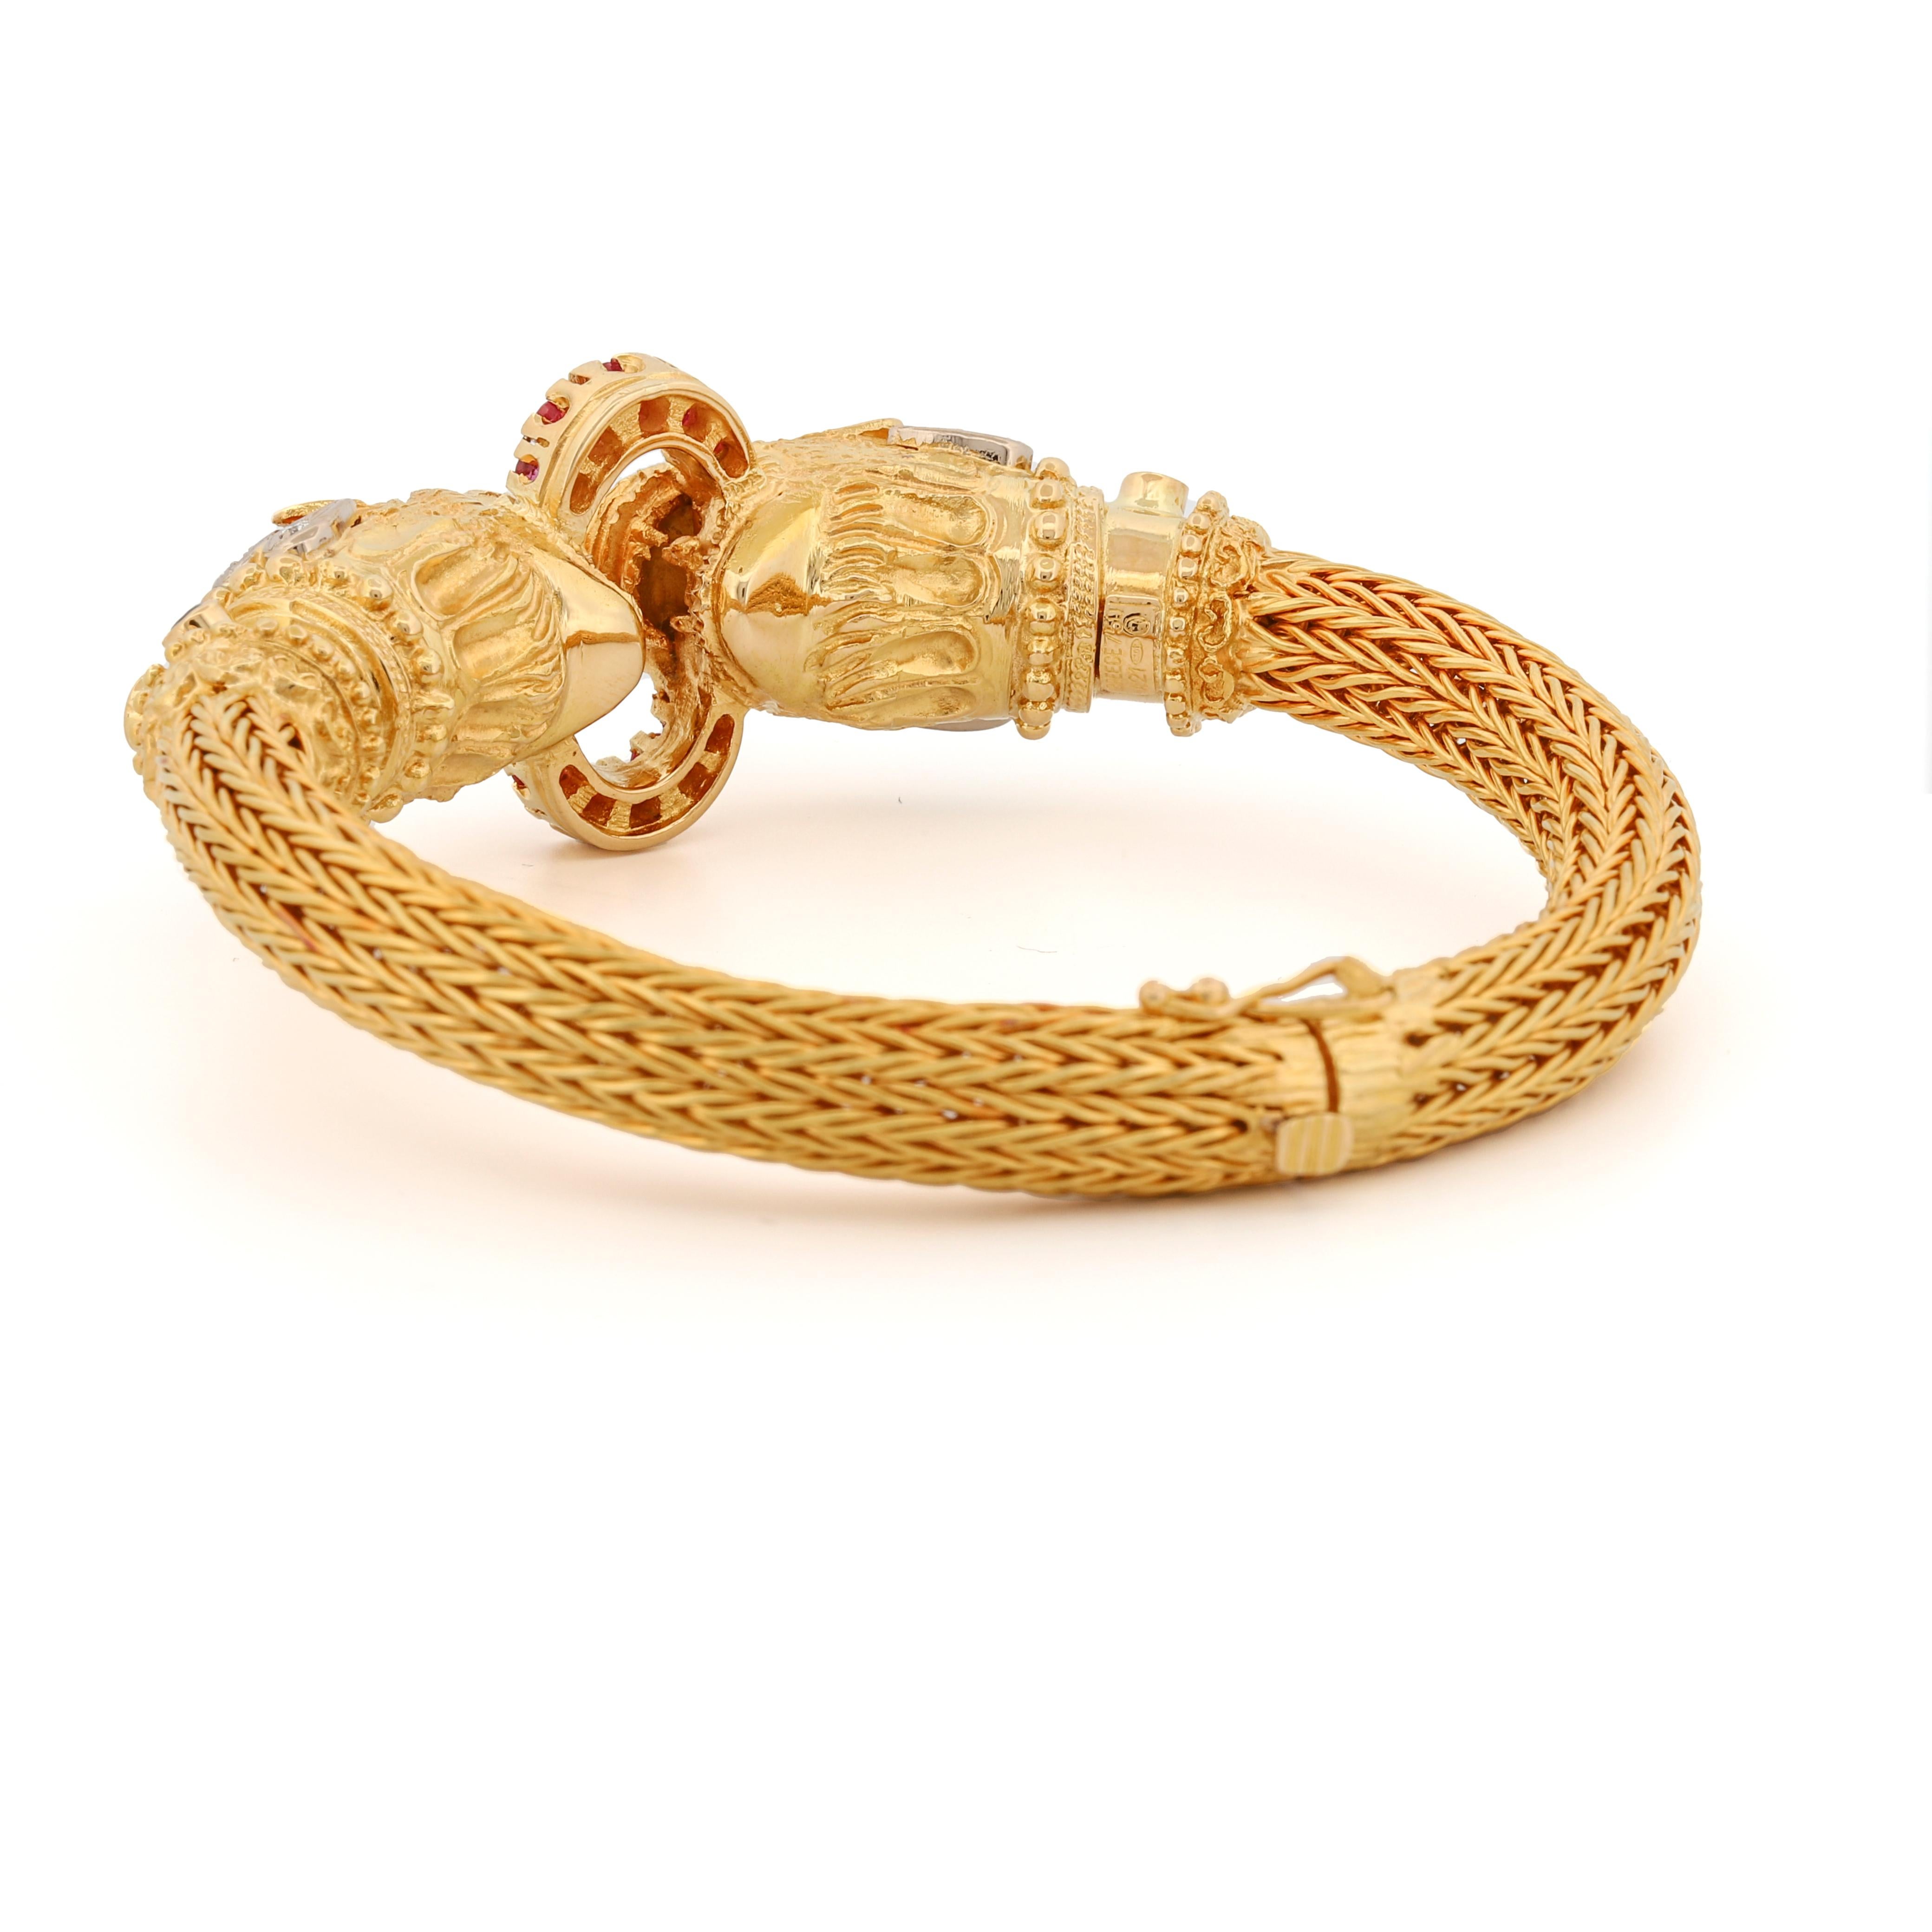 Lalaounis Double Lion Head Bracelet in 18k Yellow Gold In Excellent Condition For Sale In Boca Raton, FL